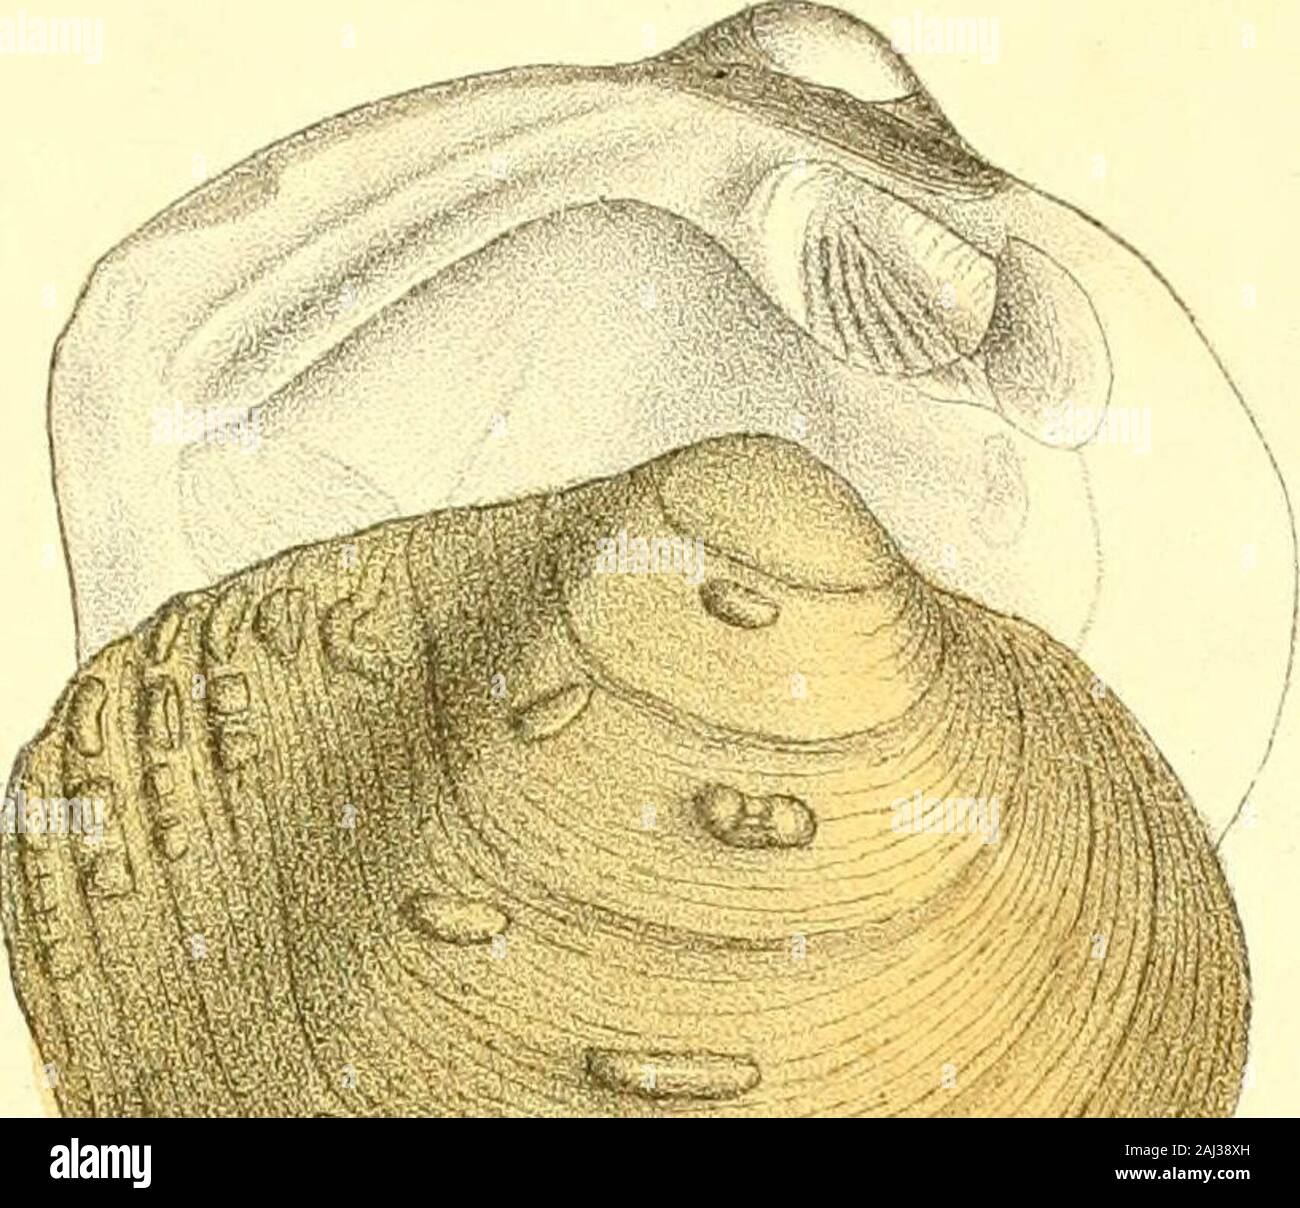 Monography of the family Unionidæ : or, Naiades of Lamarck (fresh water bivalve shells) of North America ... . ; substance of the shell thick;beaks elevated and granulated at tip; ligament slopedescending, short; posterior margin direct, nearlystraight; epidermis bright brown, a single broad in-terrupted green ray passes from the apex to the middleof the disk; within white; lateral teeth very short,straight, thick and oblique. SYNONYMES. U. bullata, Raf. Ann. gen. des Sc. Phys., vol. v. p. 41. Poul- sons trans., p. 43.U. verrucosus albus, Hild. Sillimans Journ., vol. xiv. p. 289.U. pustulosus, Stock Photo